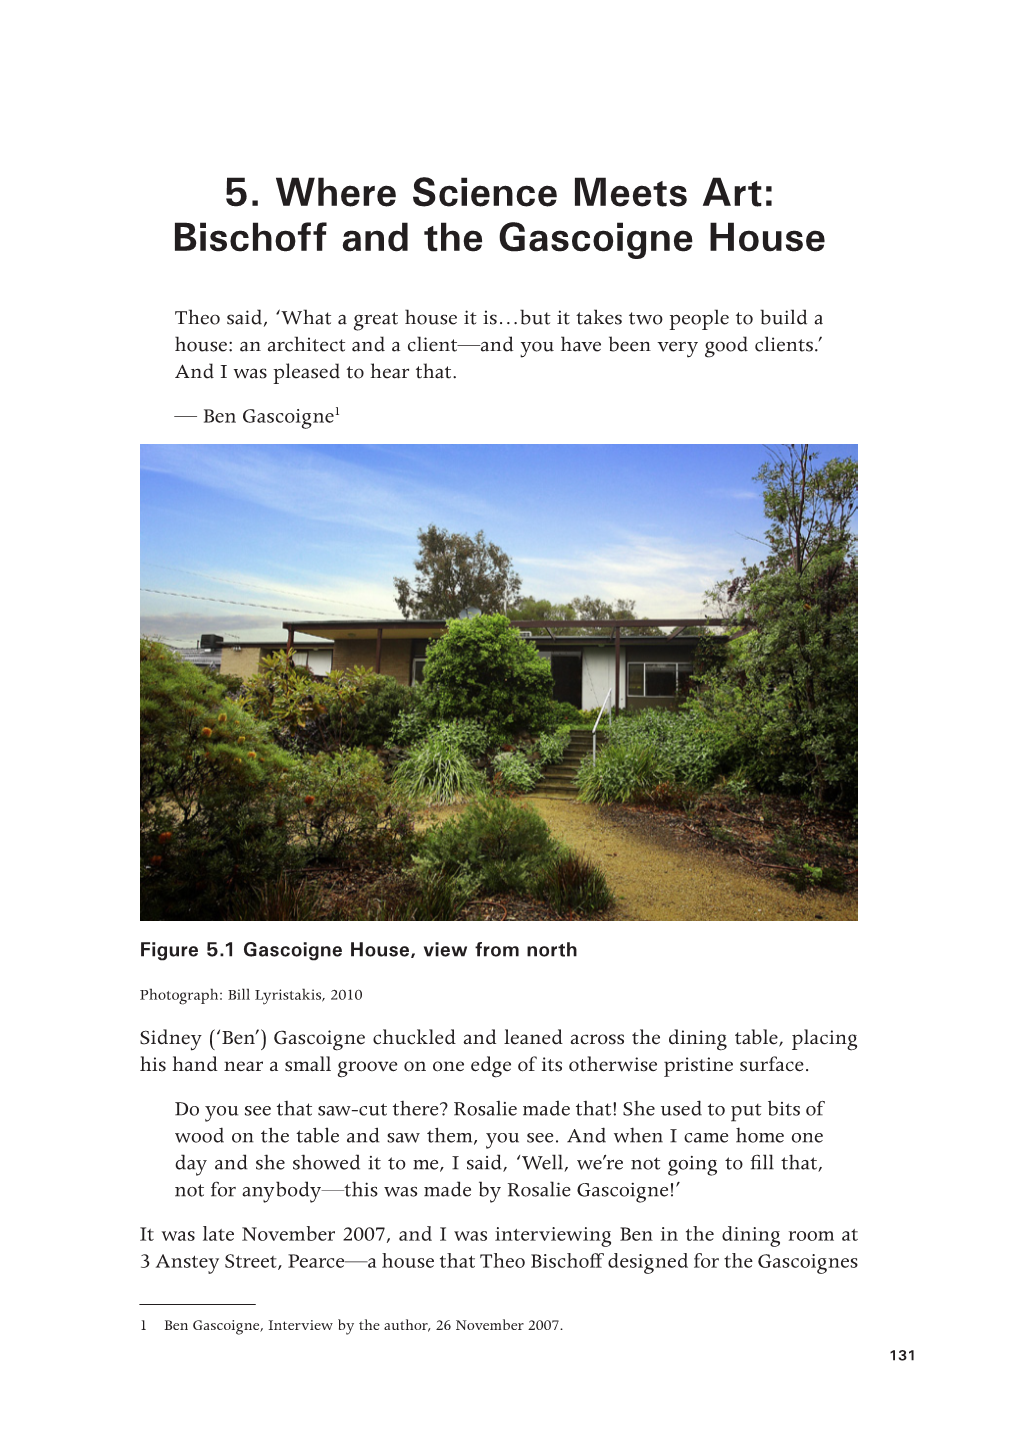 Bischoff and the Gascoigne House